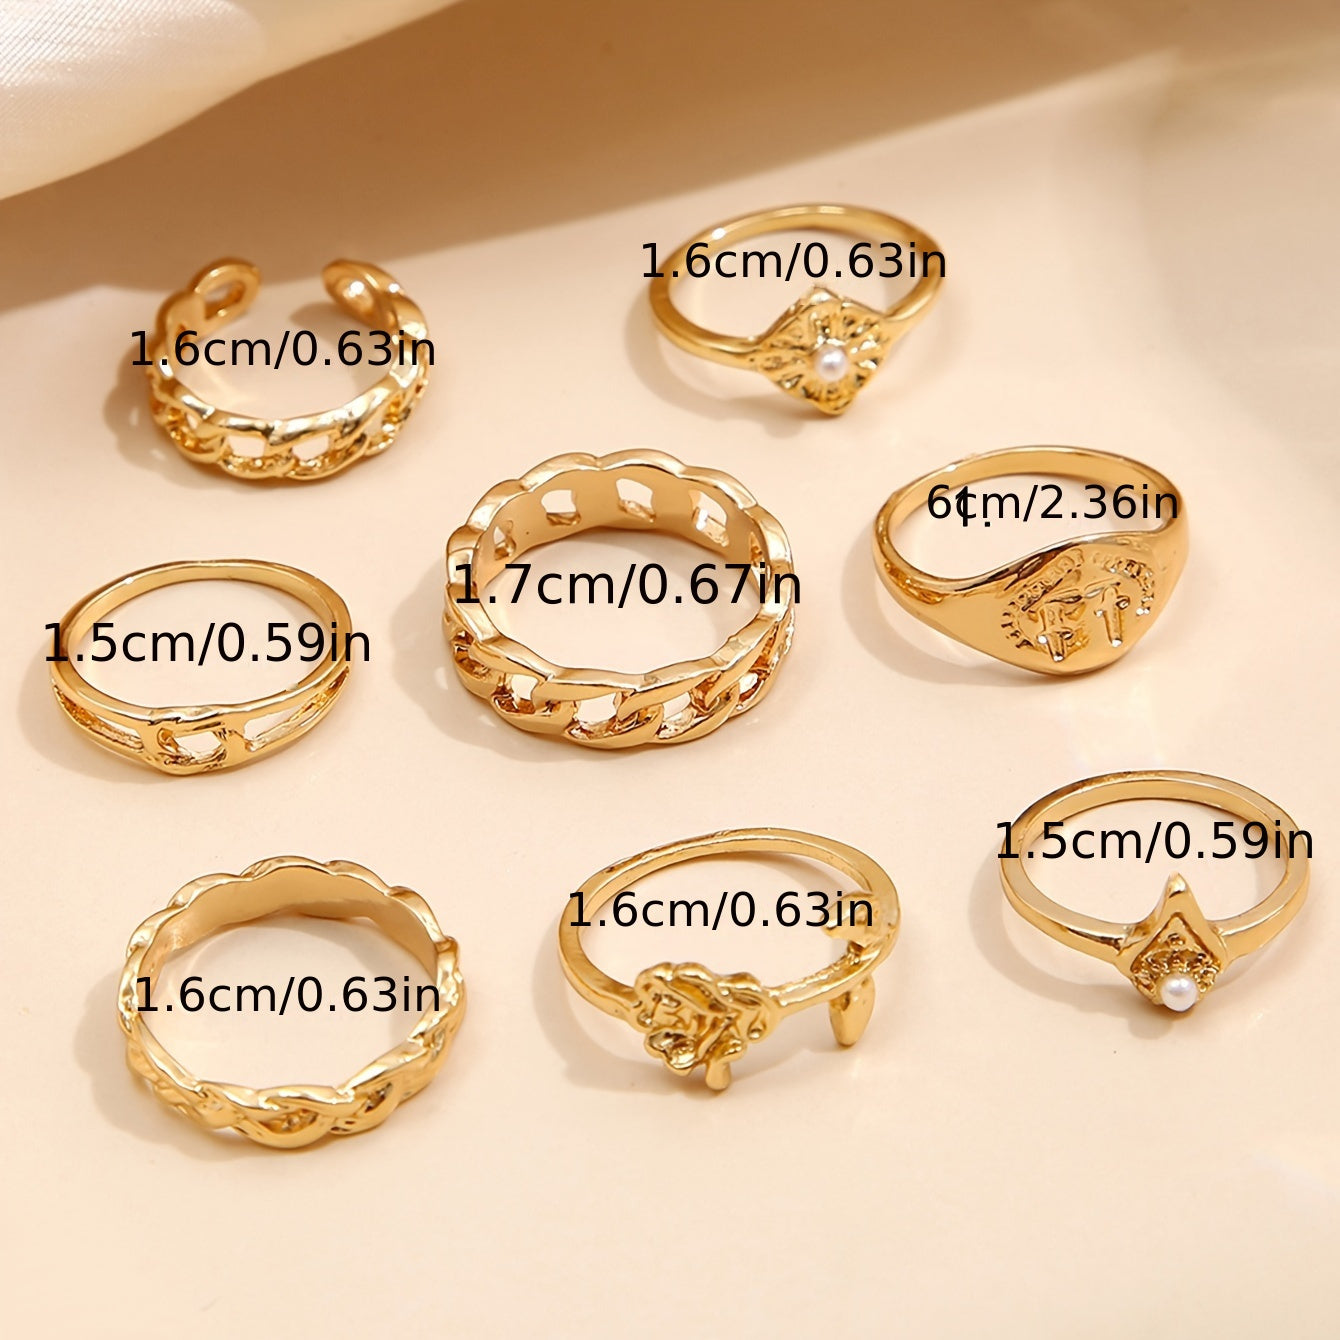 23pcs Y2k Style Stacking Rings Trendy Butterfly/ Chain/ Heart/ Evil Eye Design Mix